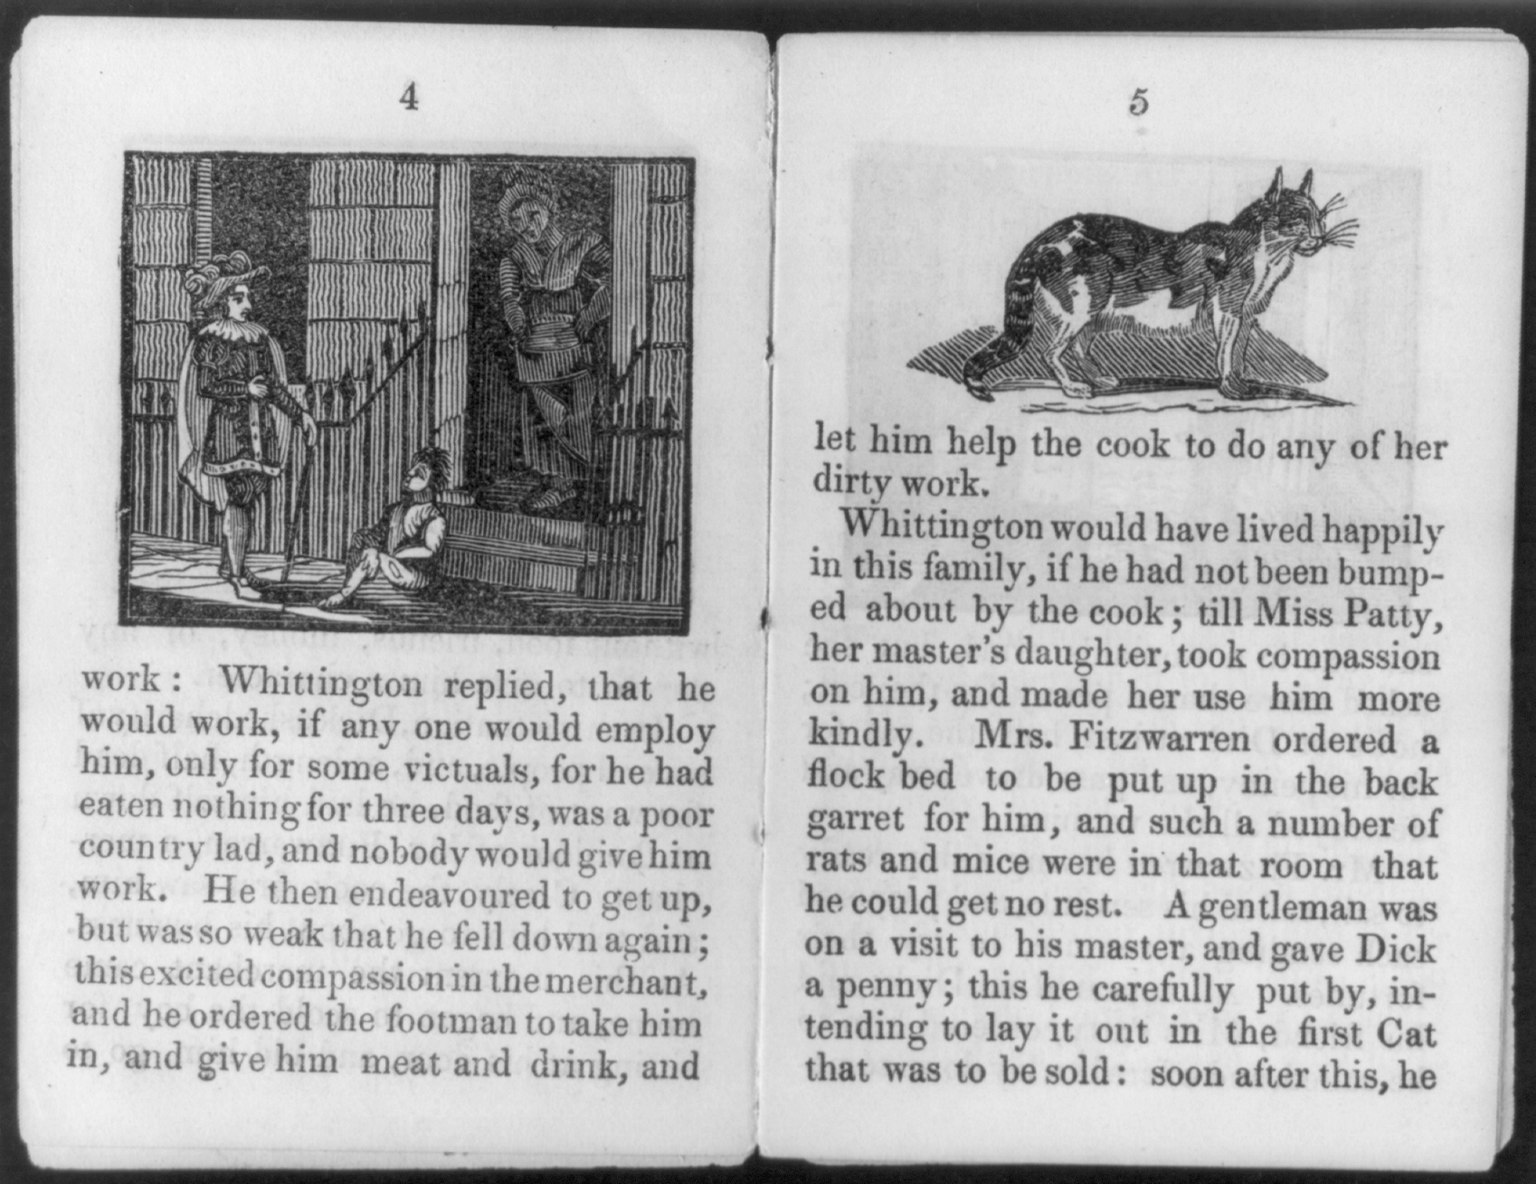 An image of a book about Dick Whittington.